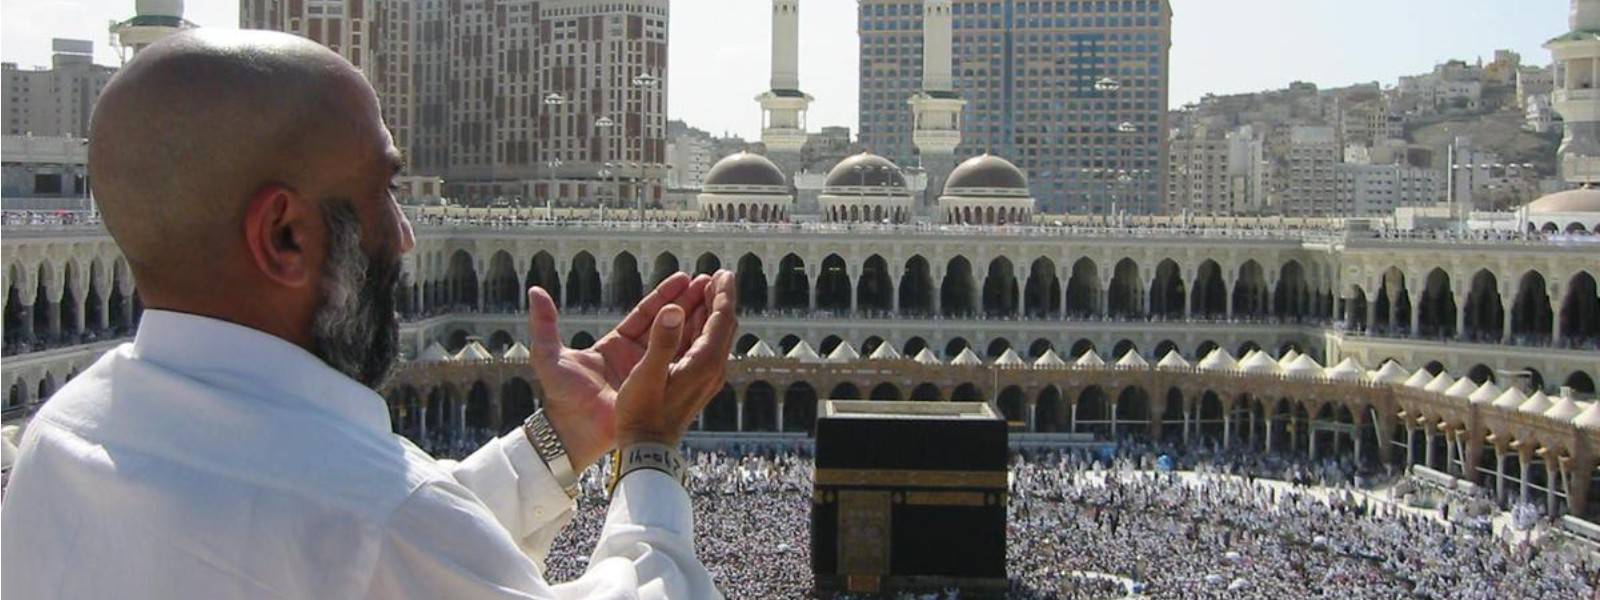 Muslims across the world celebrate Hajj, while adhering COVID restrictions